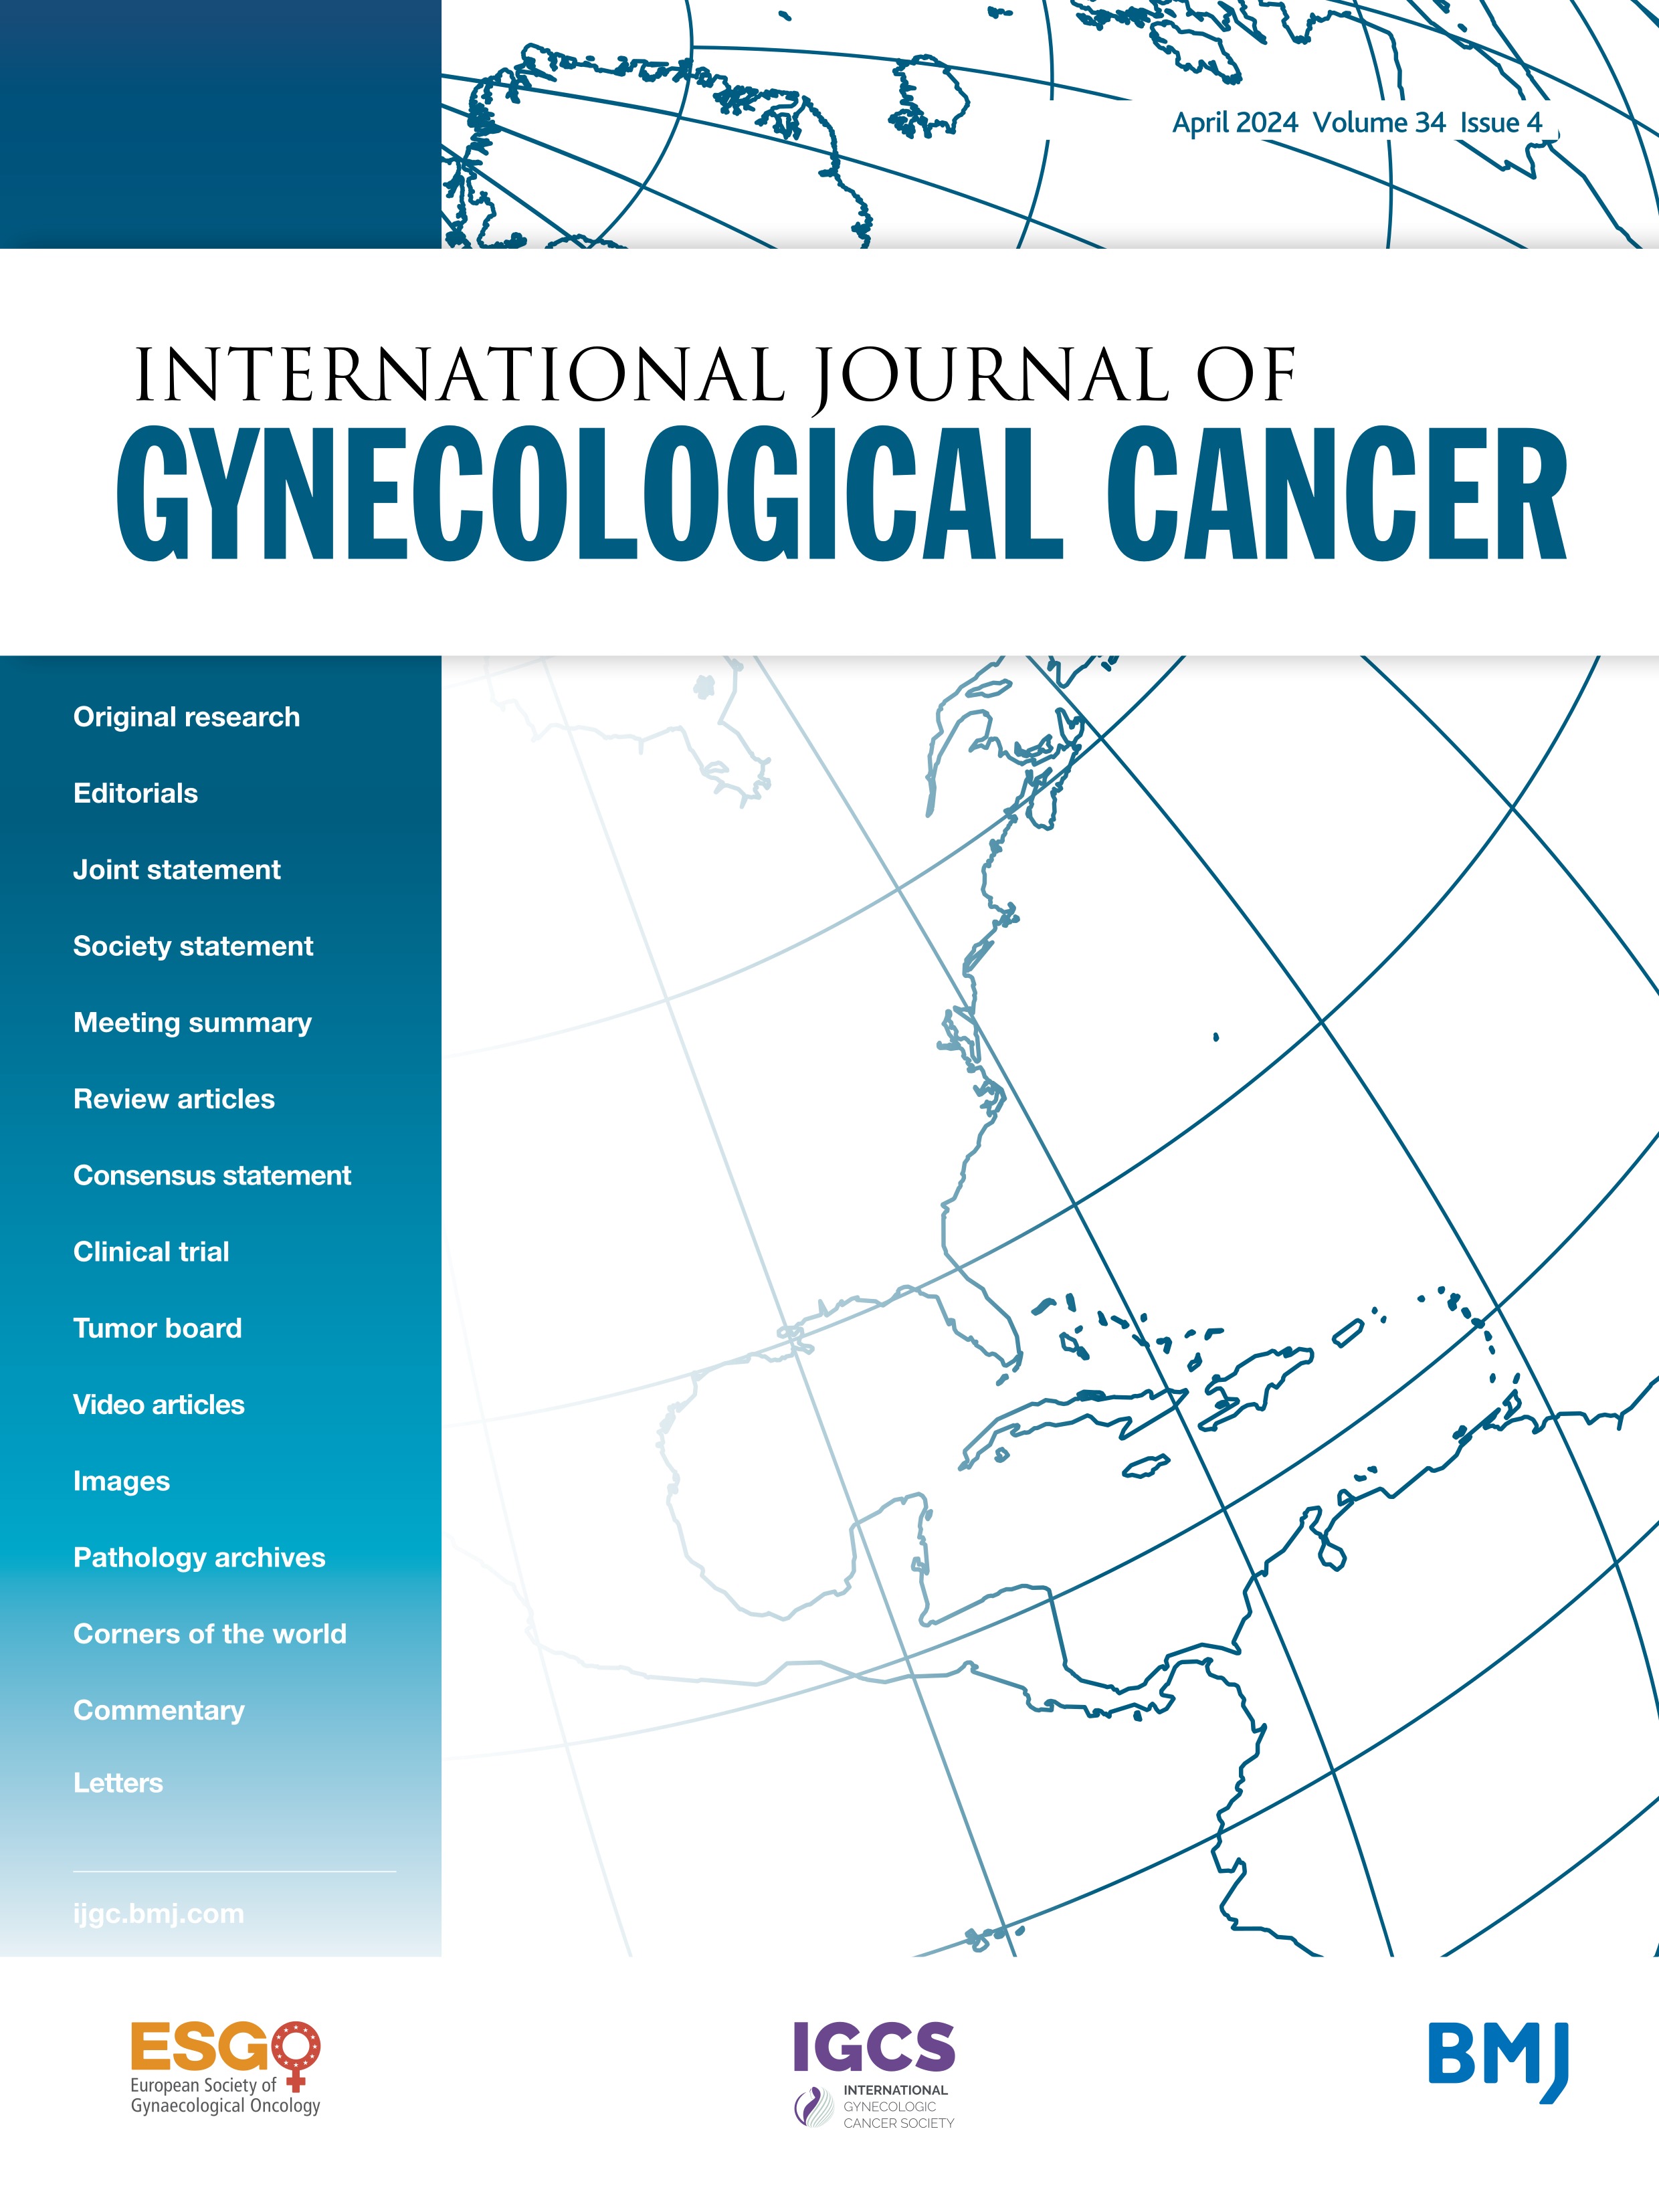 Intrauterine manipulator use during laparoscopic hysterectomy for endometrial cancer: association for pathological factors and oncologic outcomes